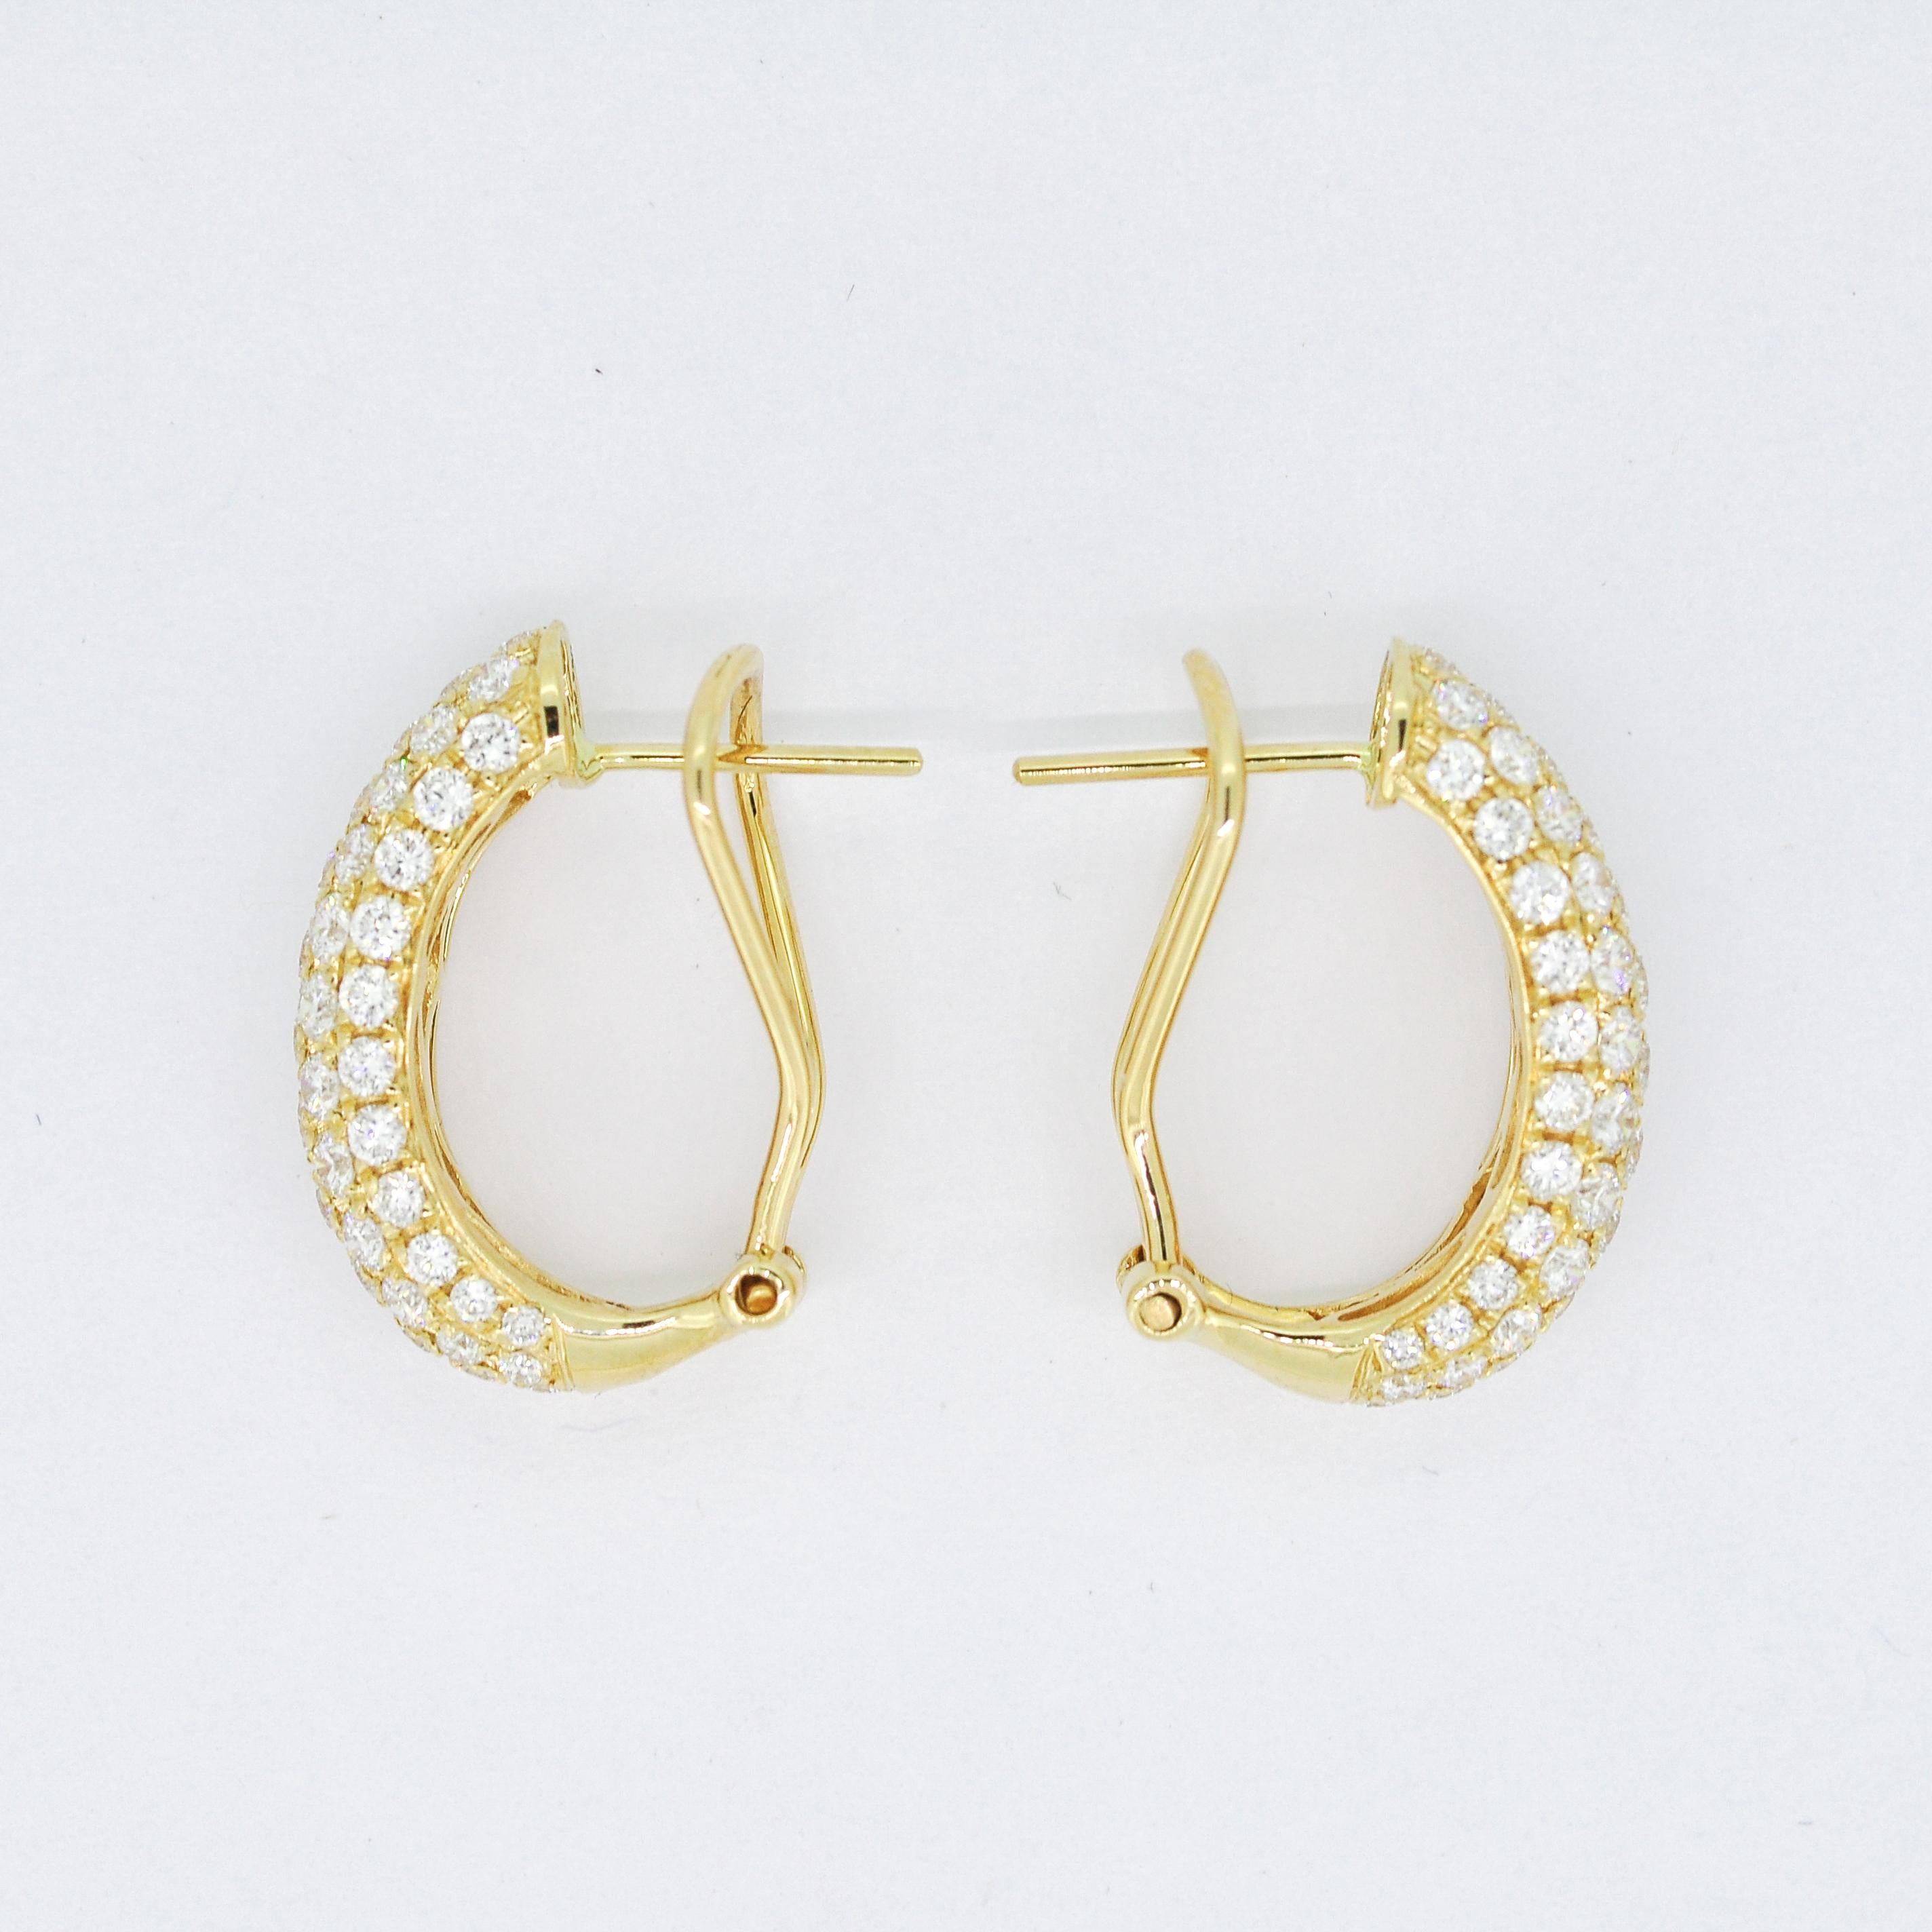 ntroducing our breathtaking 18k yellow gold hoop earrings adorned with a dash of 5 Row round-shape diamond pavé. These earrings are designed to add a brilliant dazzle to any ensemble, ensuring you stand out with elegance and sophistication.

Crafted